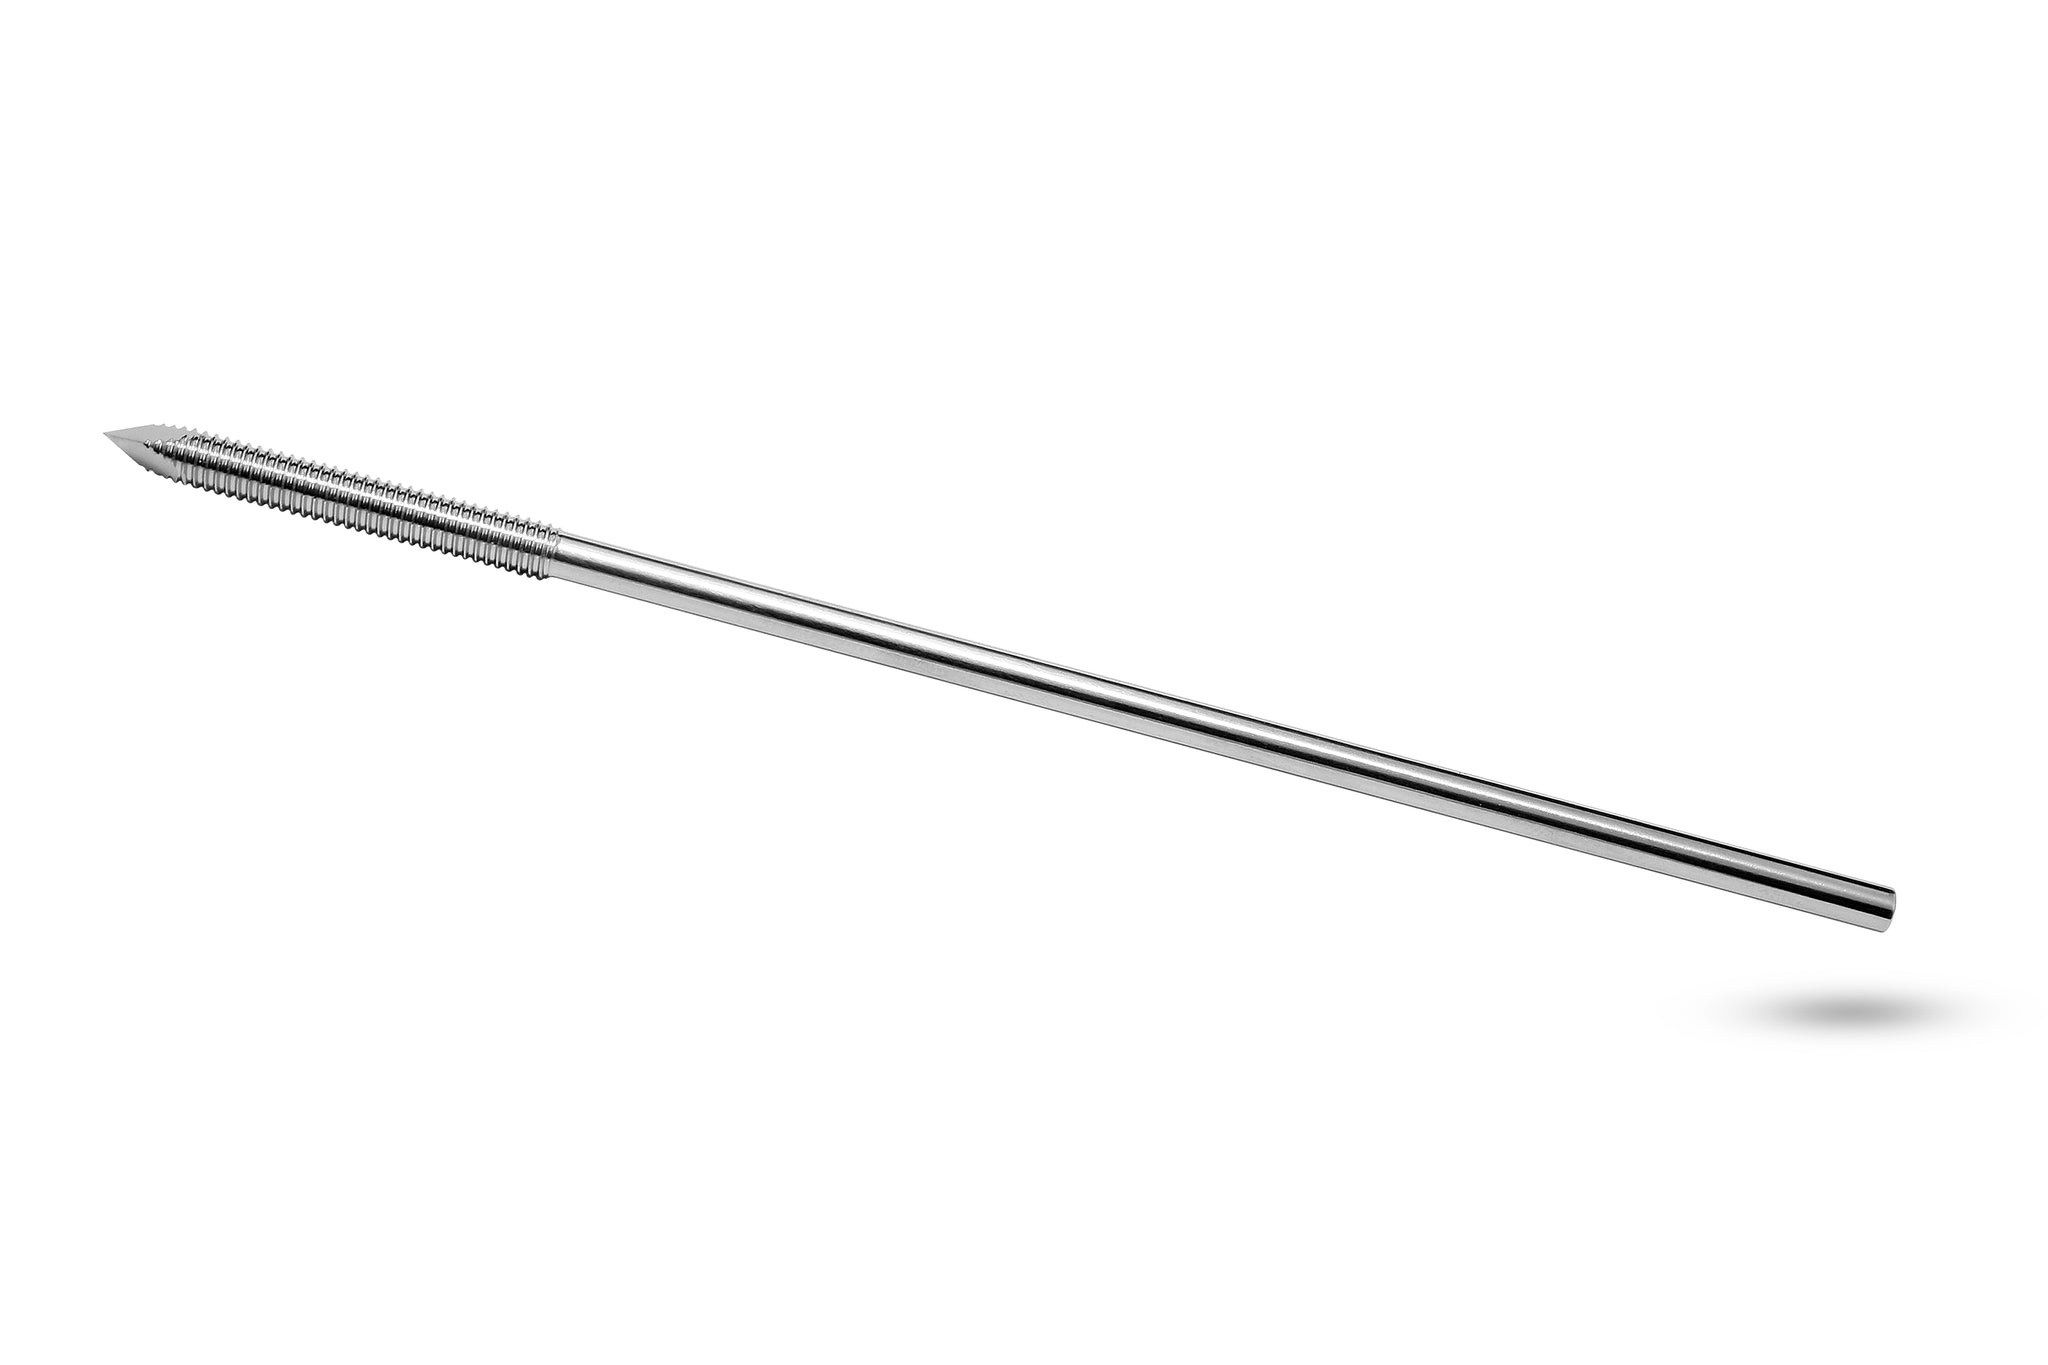 Interface Fixation Half-pin, Standard Threads, End Threaded with Trocar Point